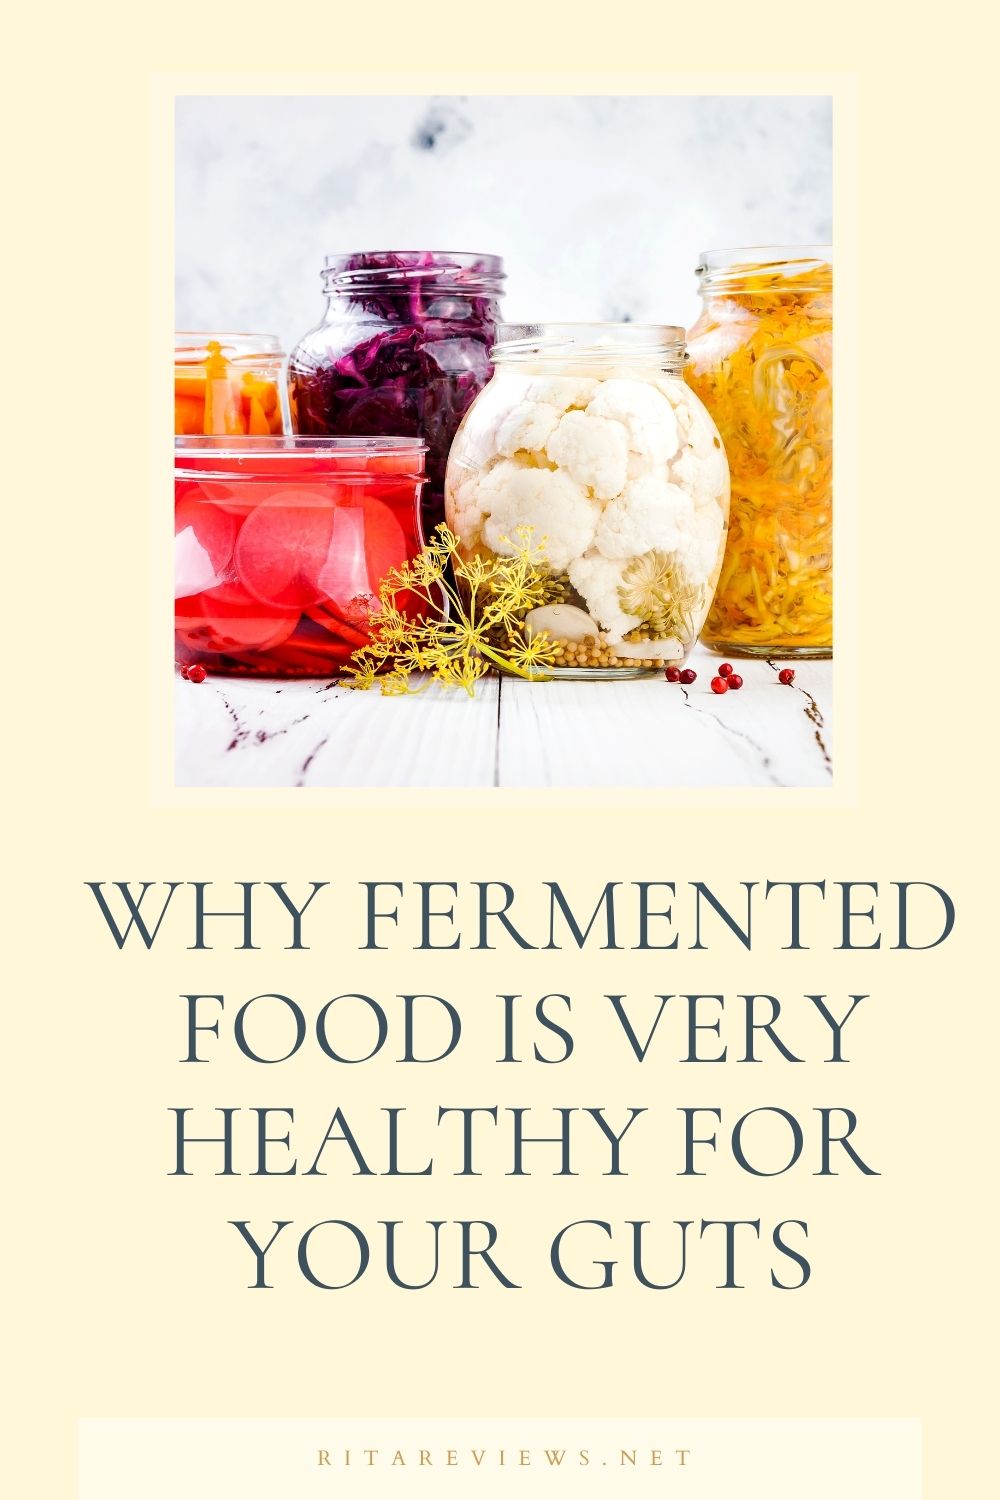 Why Fermented Food Is Very Healthy For Your Guts